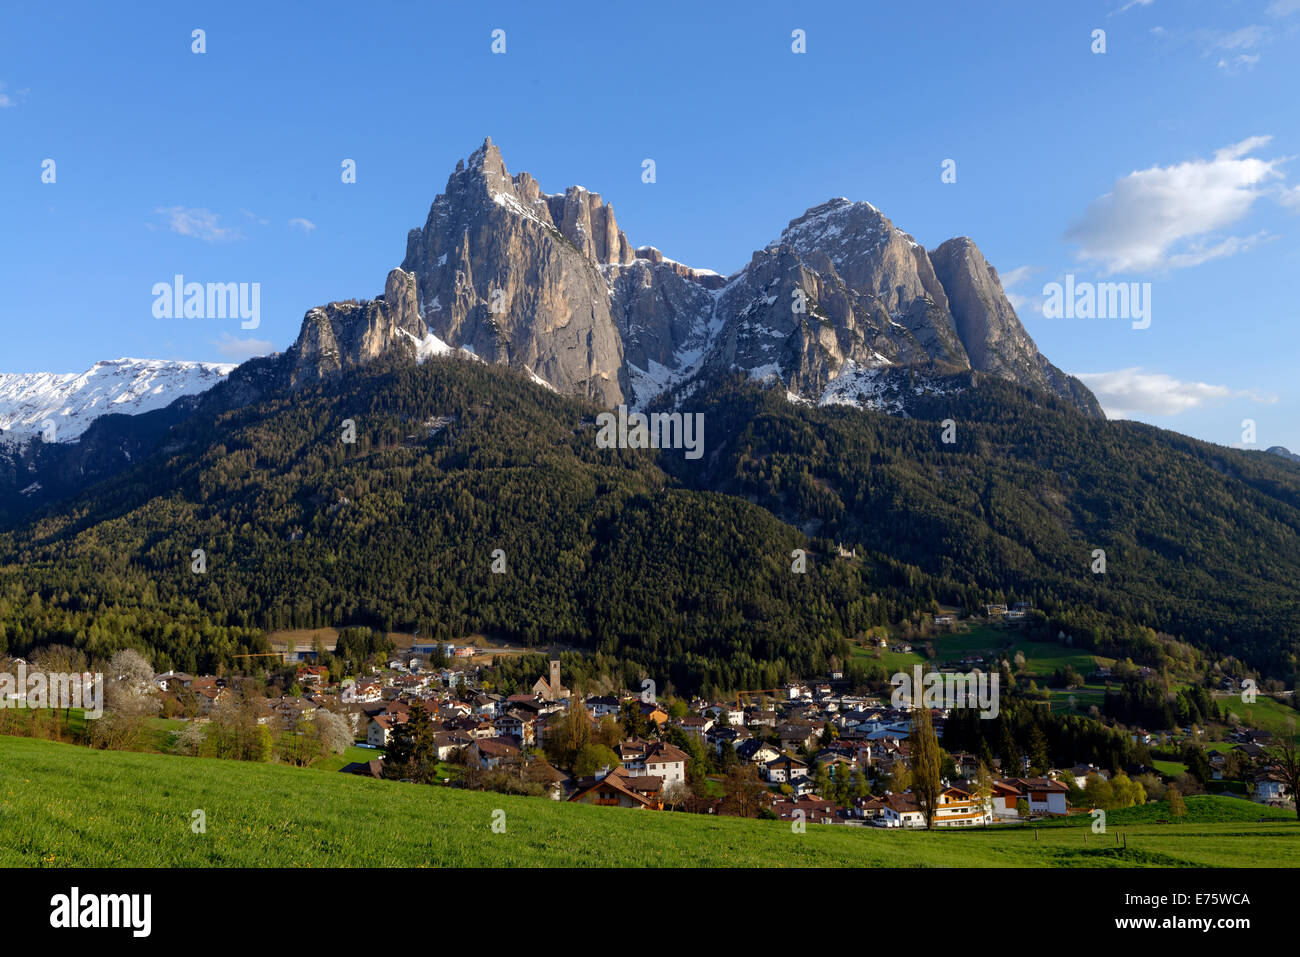 Town of Seis am Schlern with Mt Schlern, Eisack Valley, South Tyrol, Italy Stock Photo